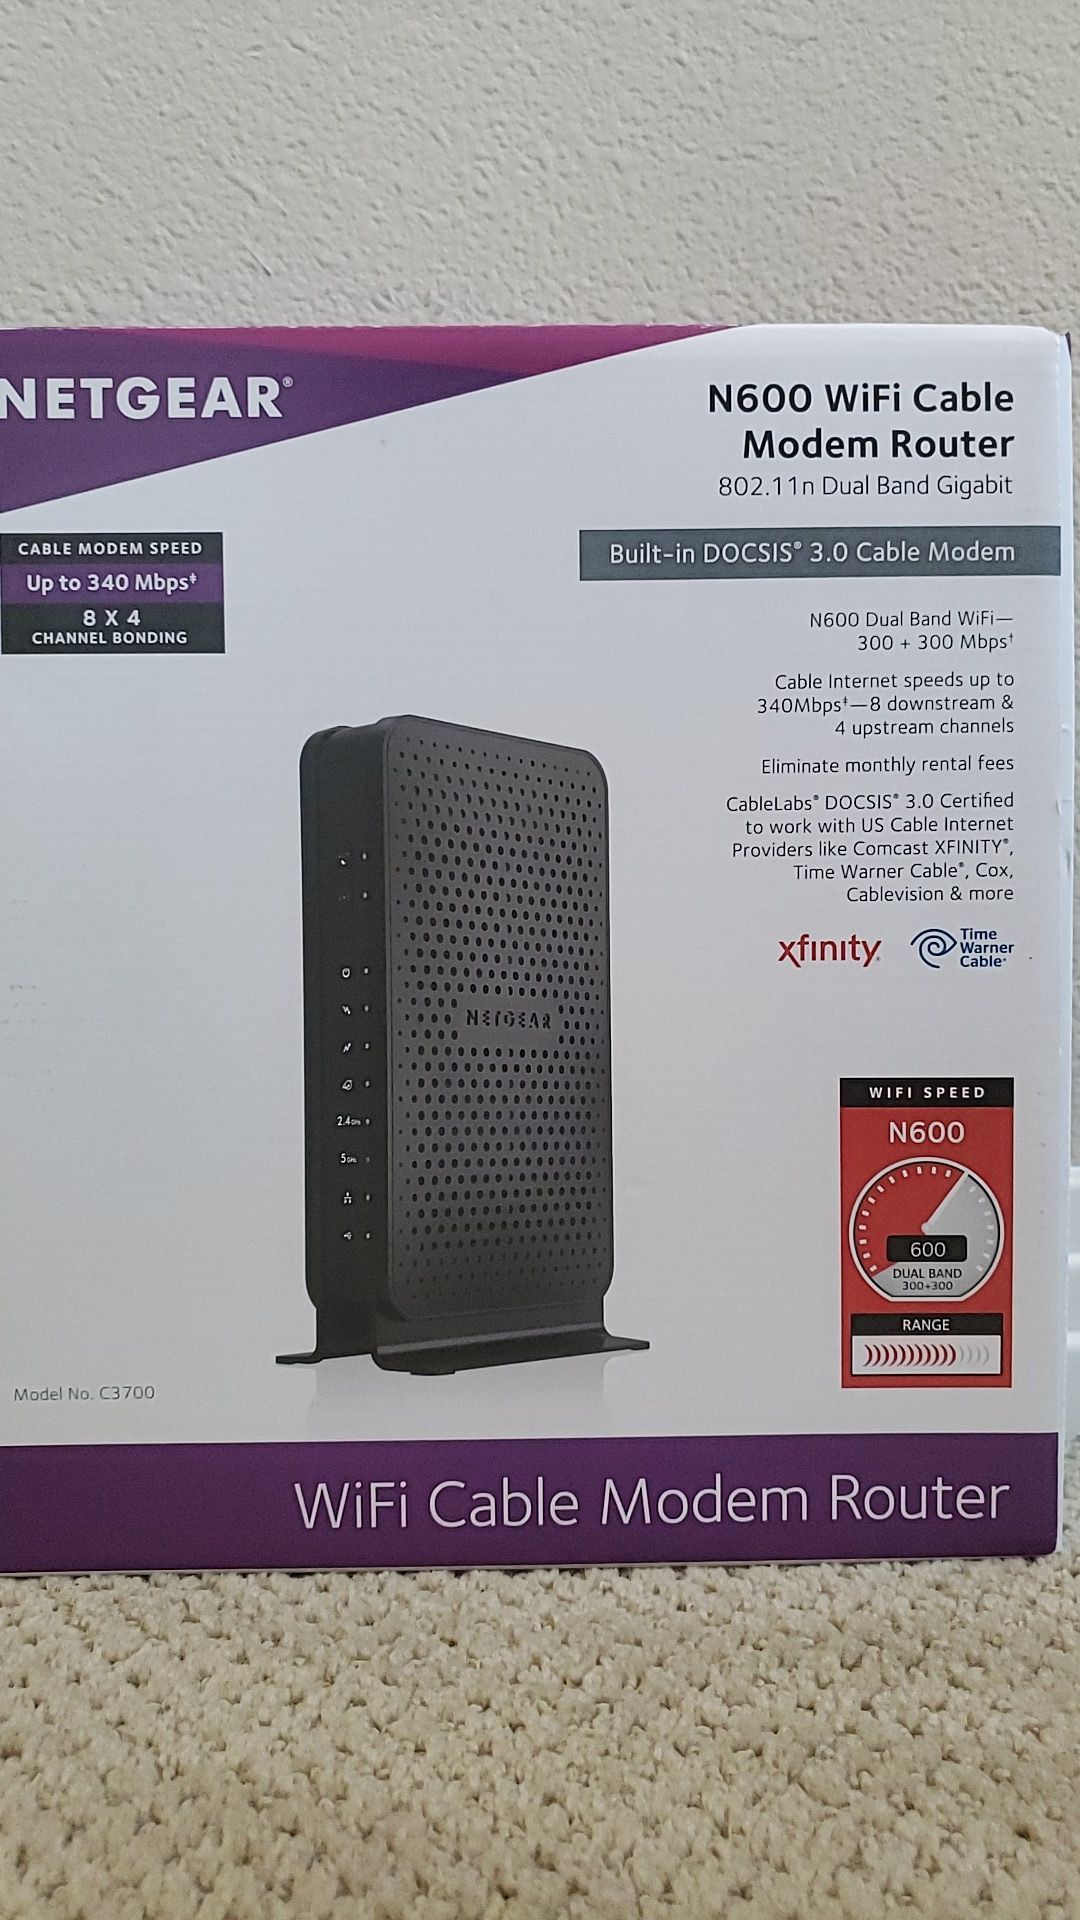 Netgear N600 Wi-Fi Cable Modem Router